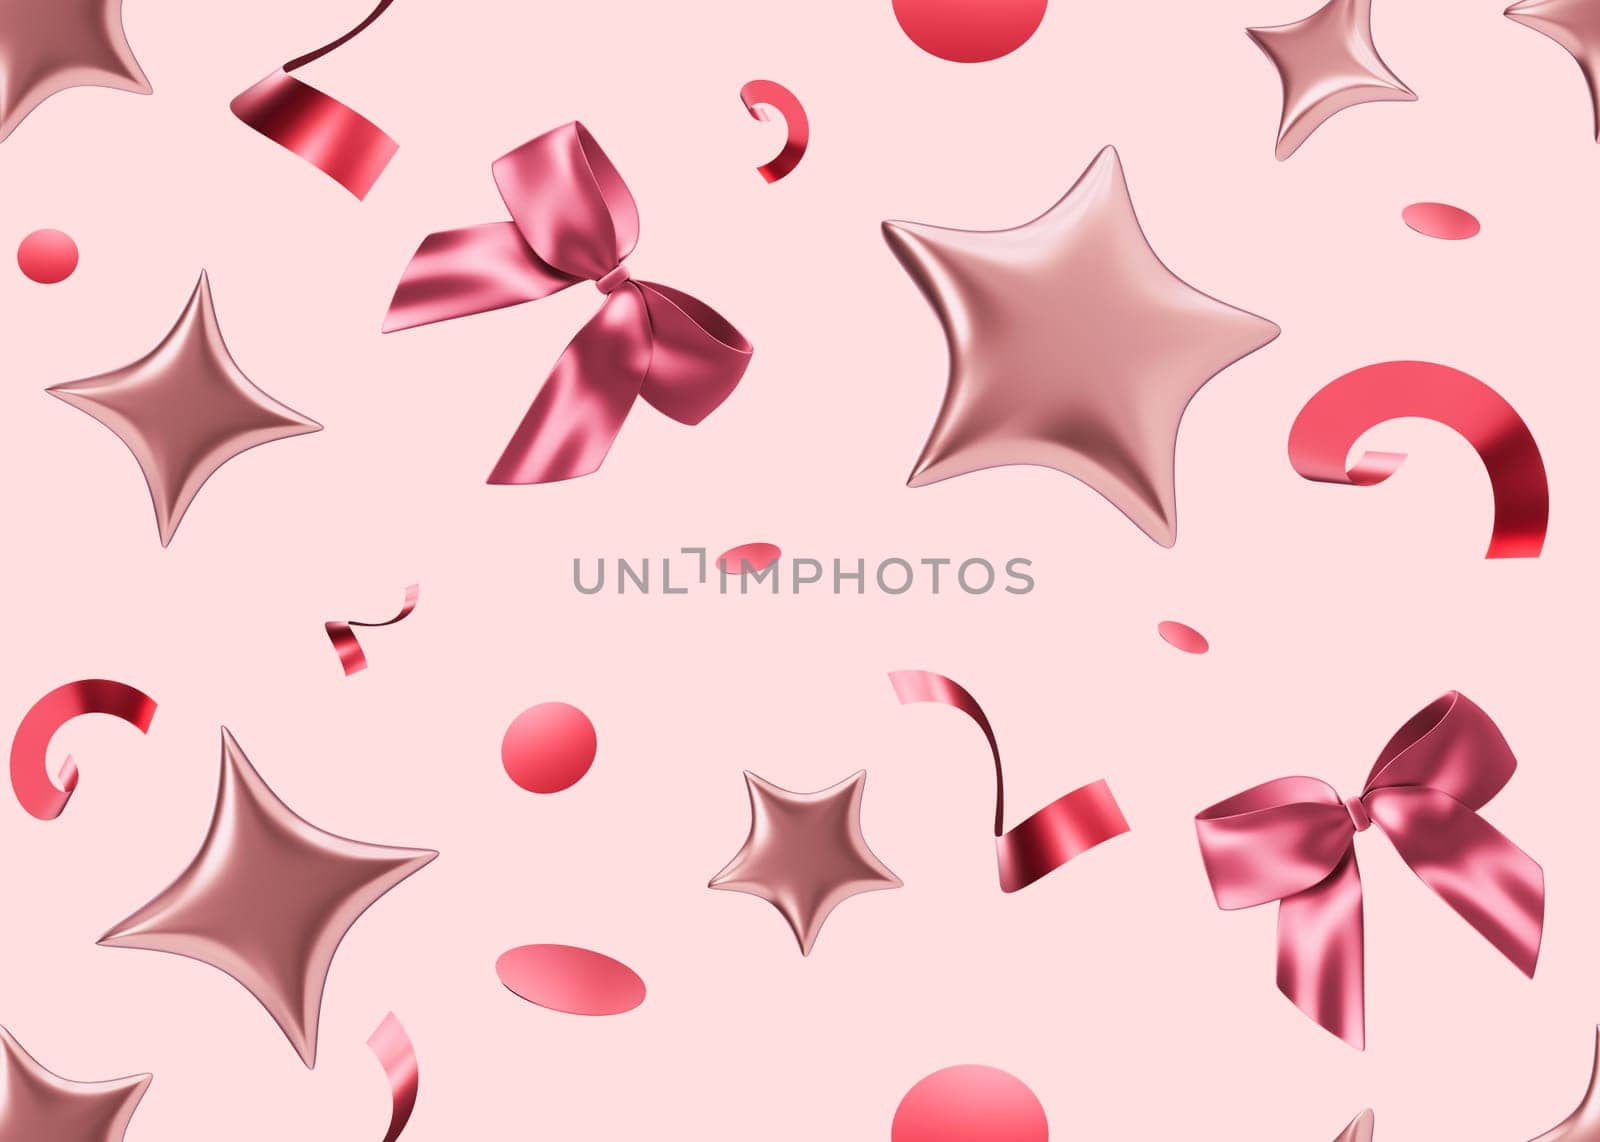 Repeatable texture, seamless pattern for girls. Shiny ribbons, bows, stars, confetti on a soft pink background. Applicable wrapping paper for gifts and presents, textile prints. Festive, playful. 3D